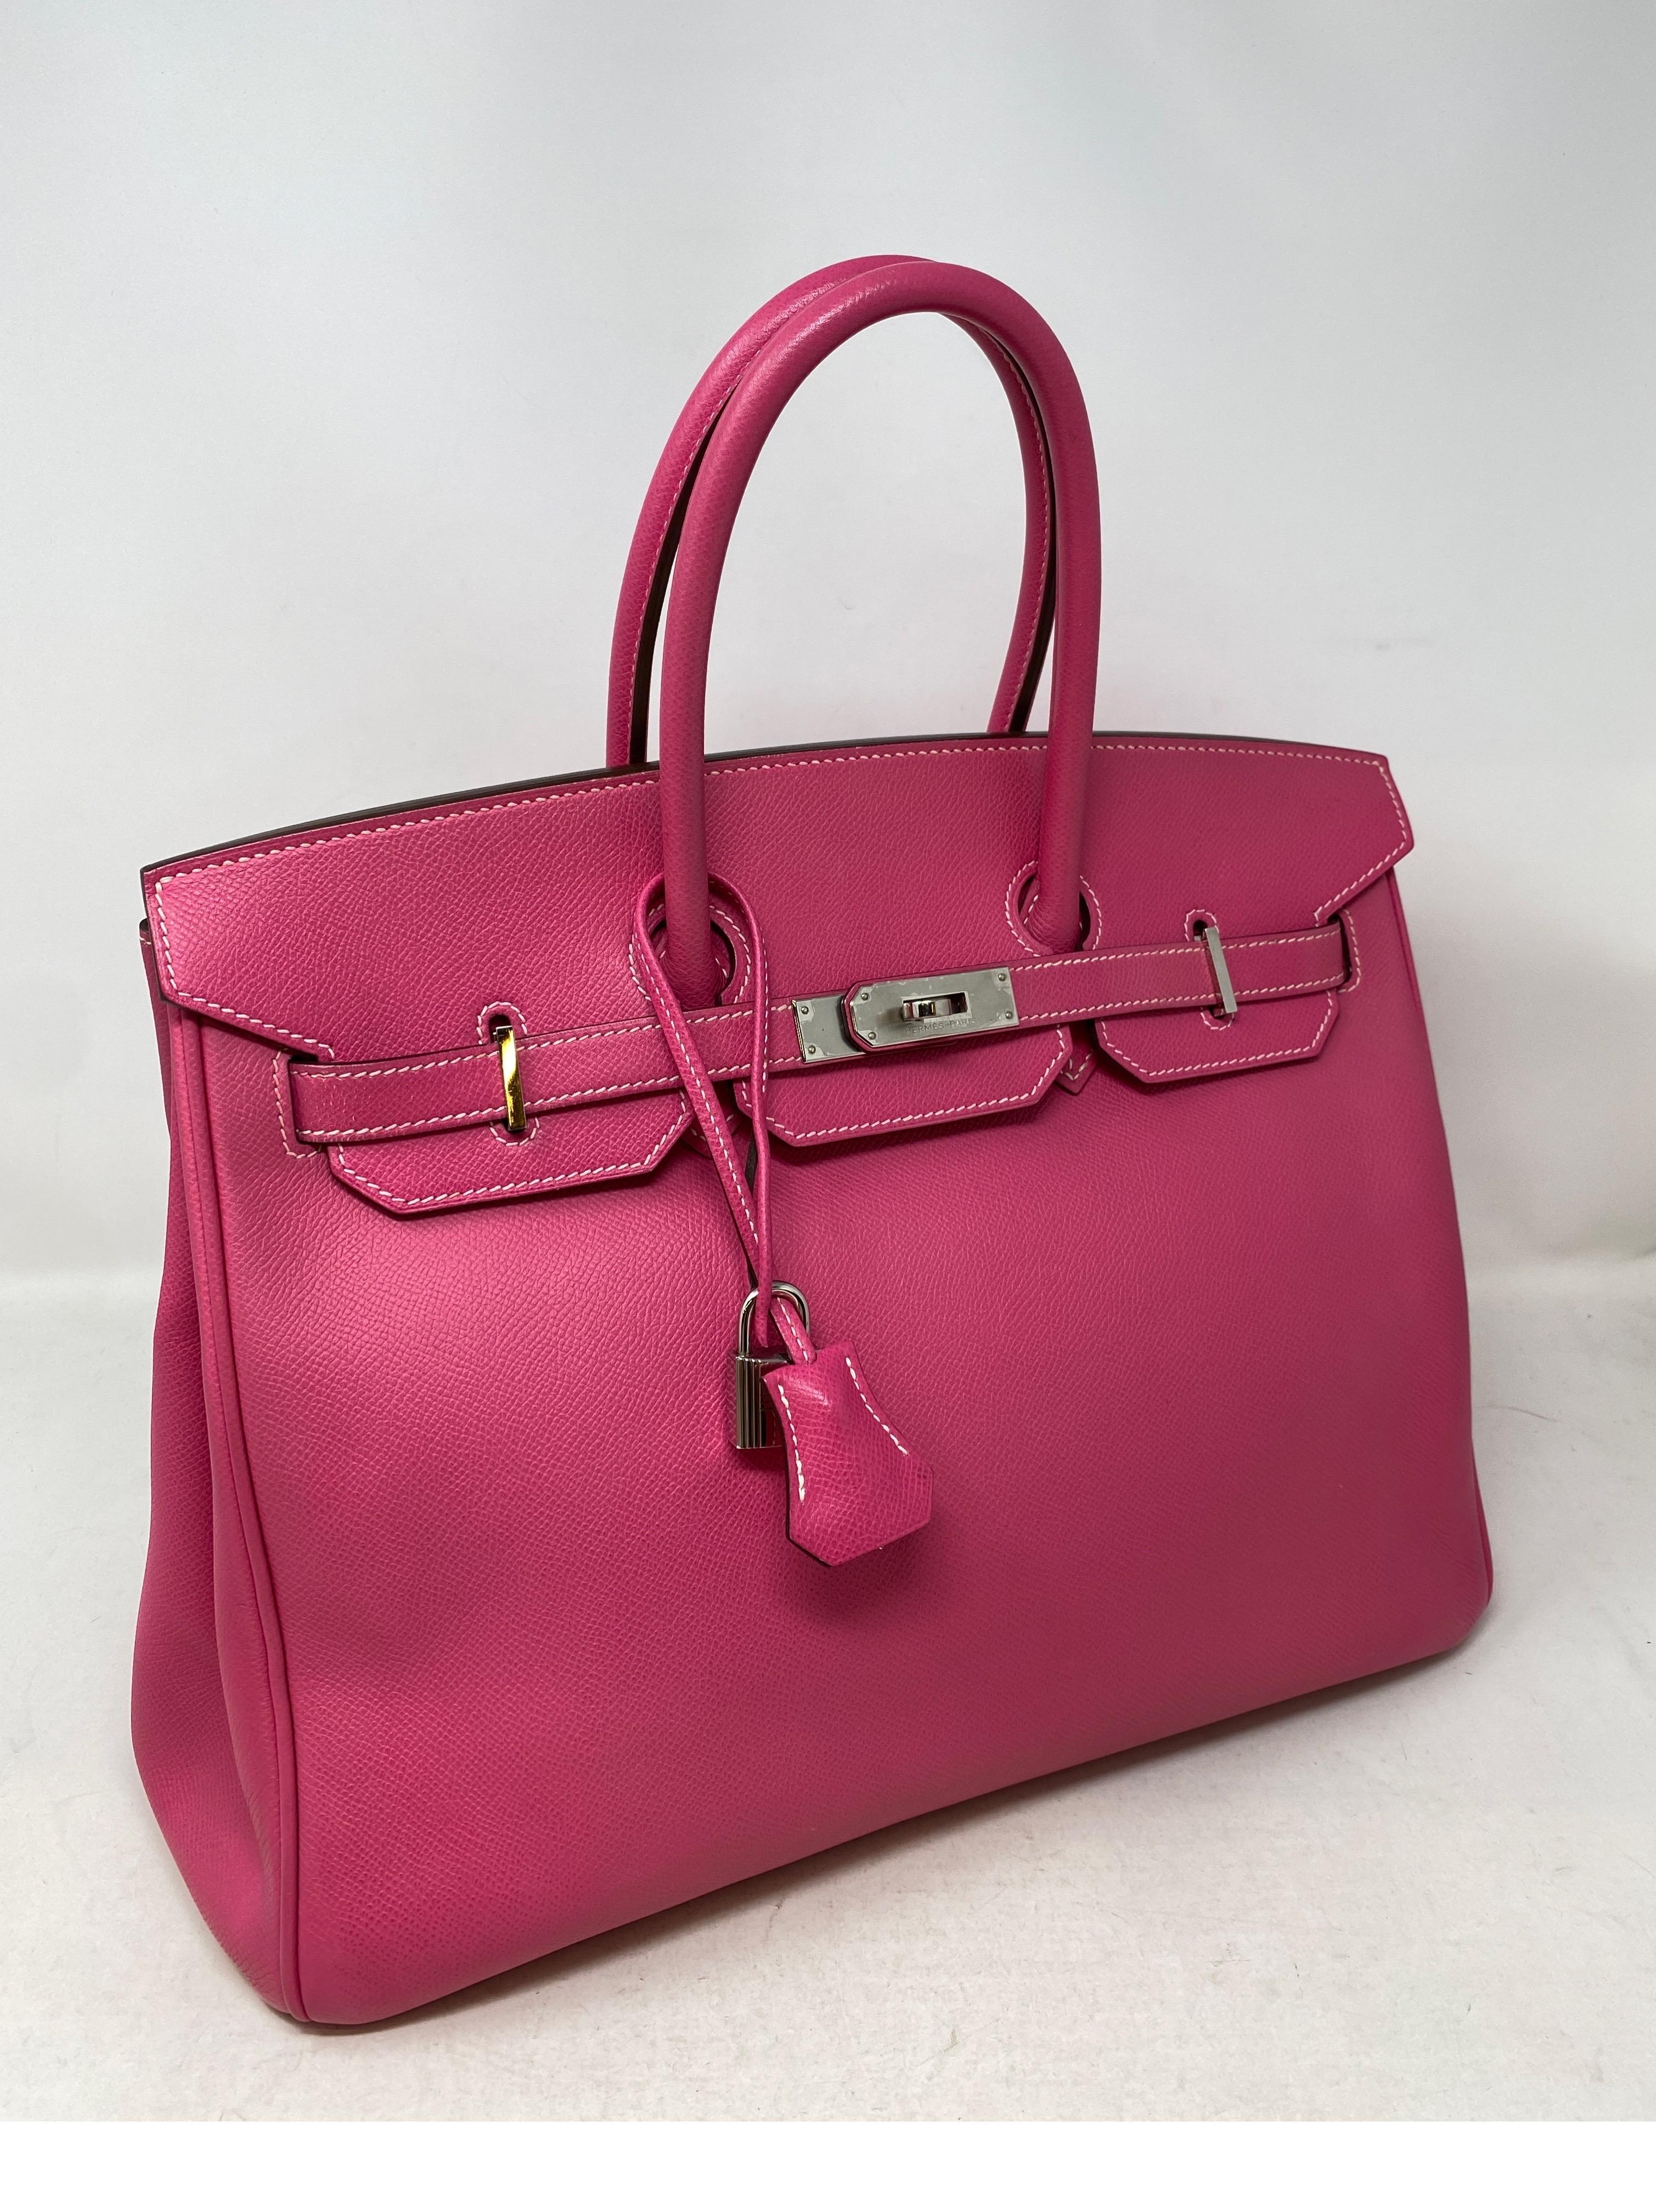 Hermes Rose Tyrien 30 Birkin Bag. Candy Birkin with rouge interior. Beautiful hot pink color with red interior. palladium hardware. Excellent condition. Most wanted size in 30. Don't miss out. Includes clochette, lock, keys, and dust cover.